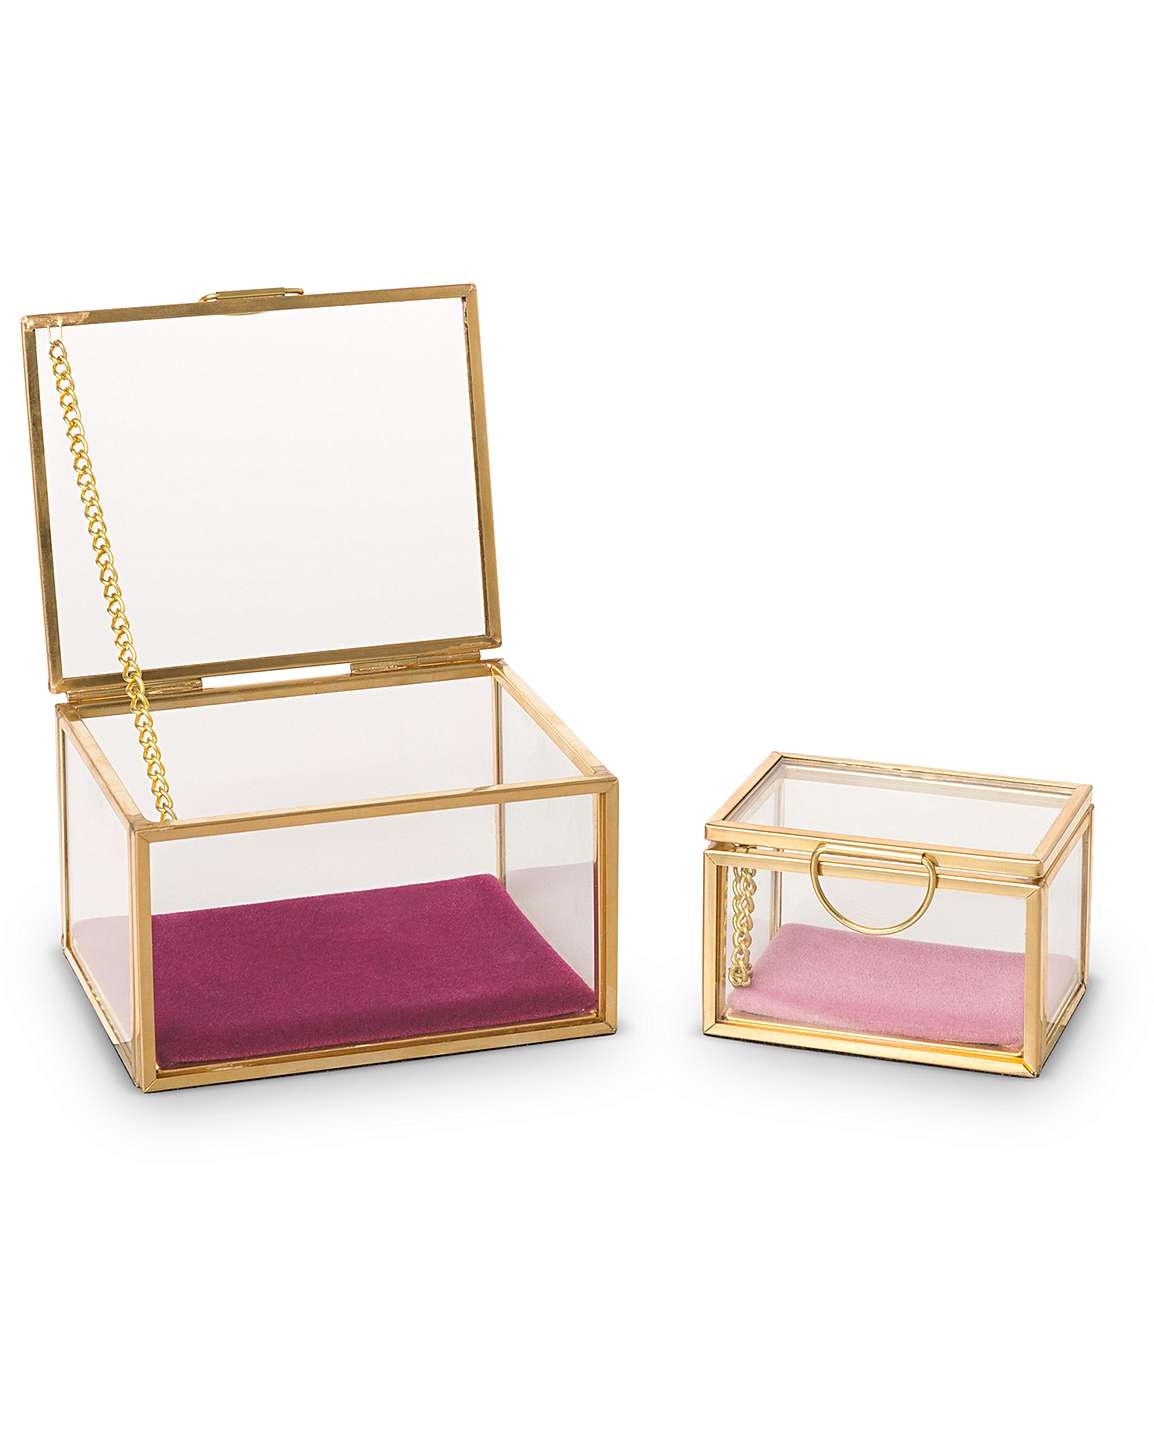 Set of Two Glass Jewelry Boxes - Cocus Pocus